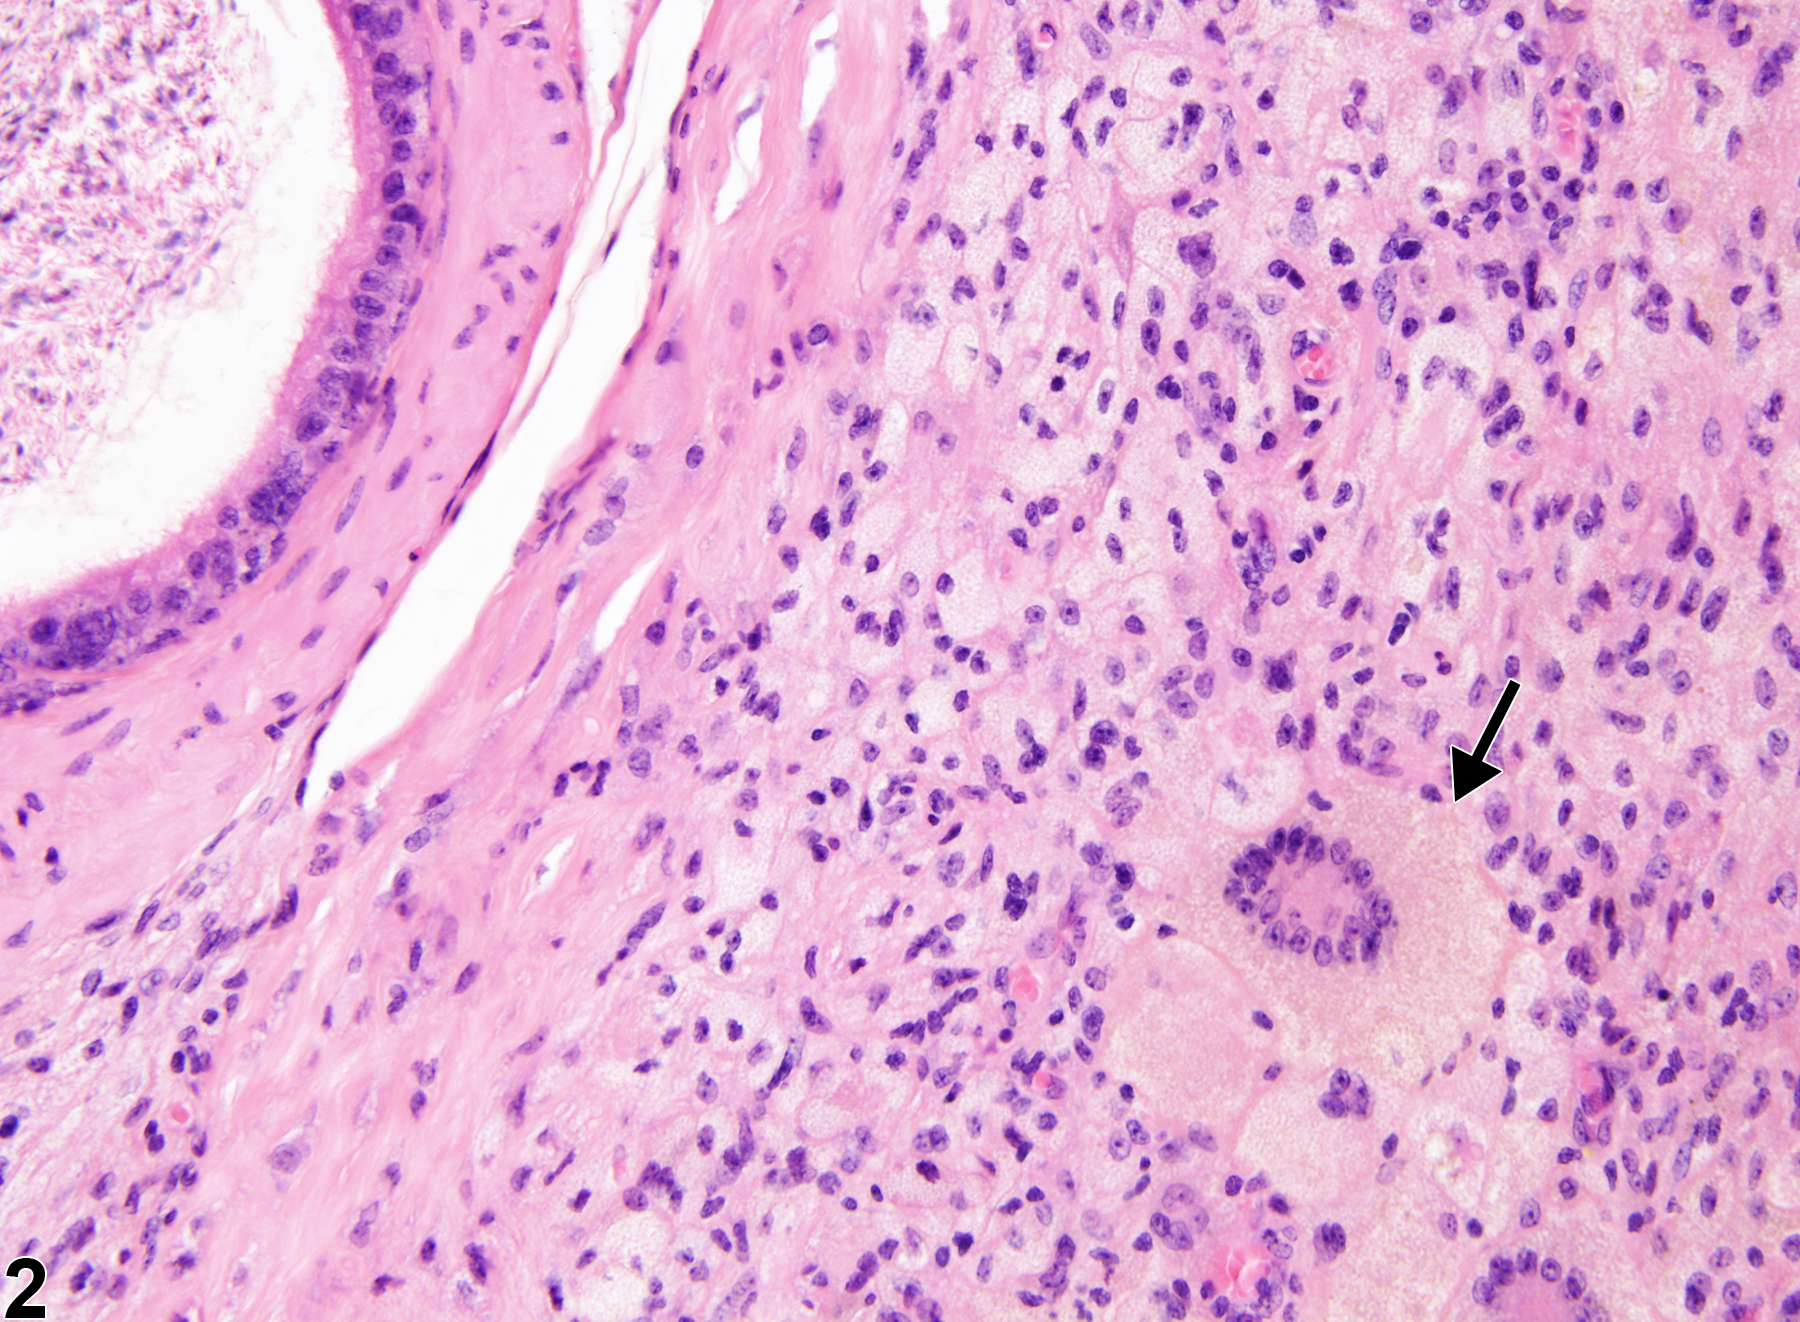 Image of sperm granuloma in the epididymis from a male B6C3F1 mouse in a chronic study